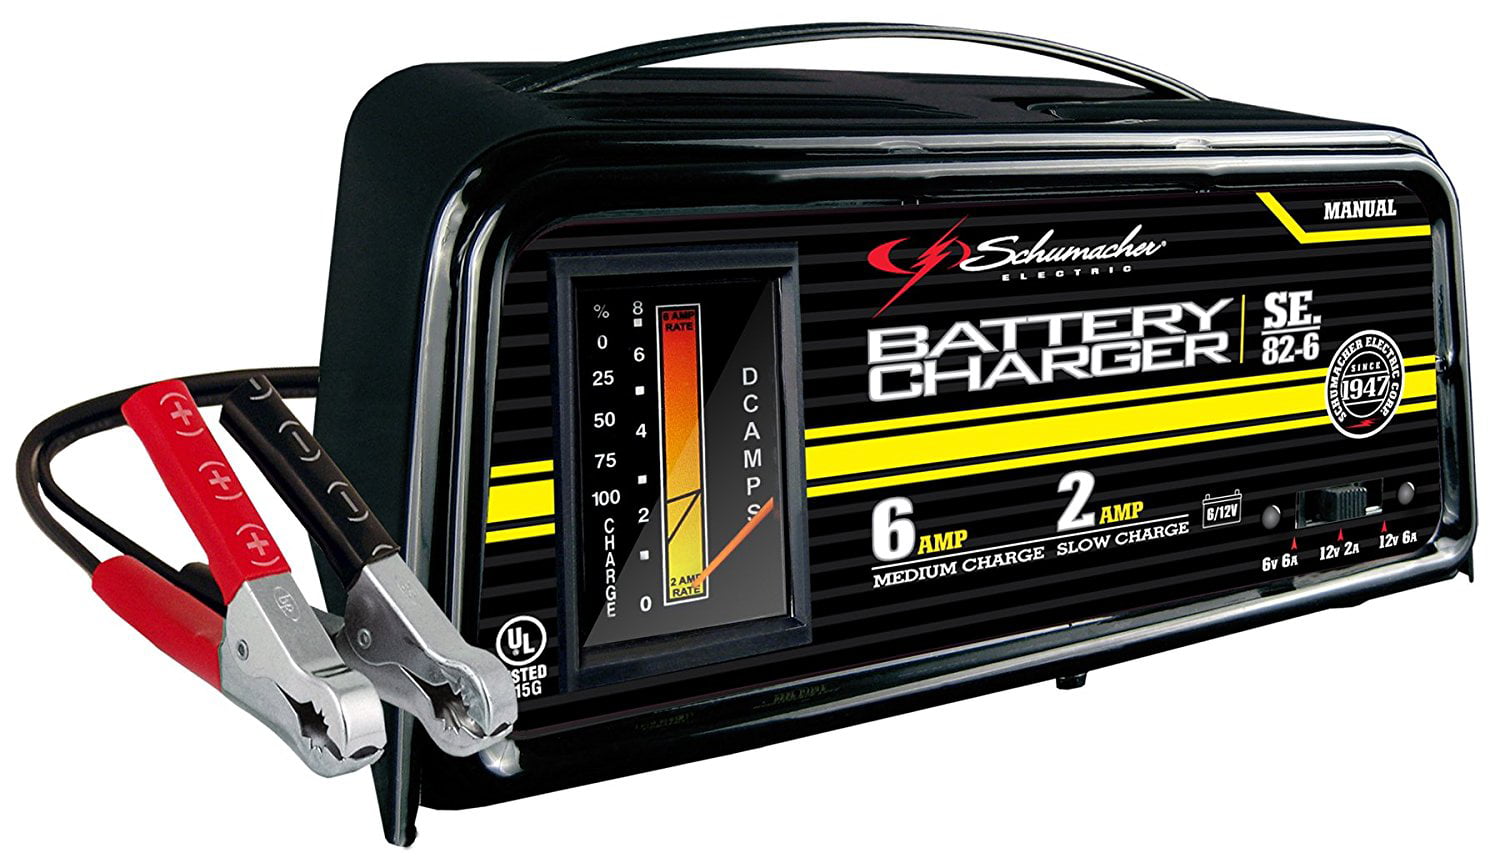 SE-82-6 Dual-Rate 2/6 Amp Manual Battery Charger, Two-in-one charger